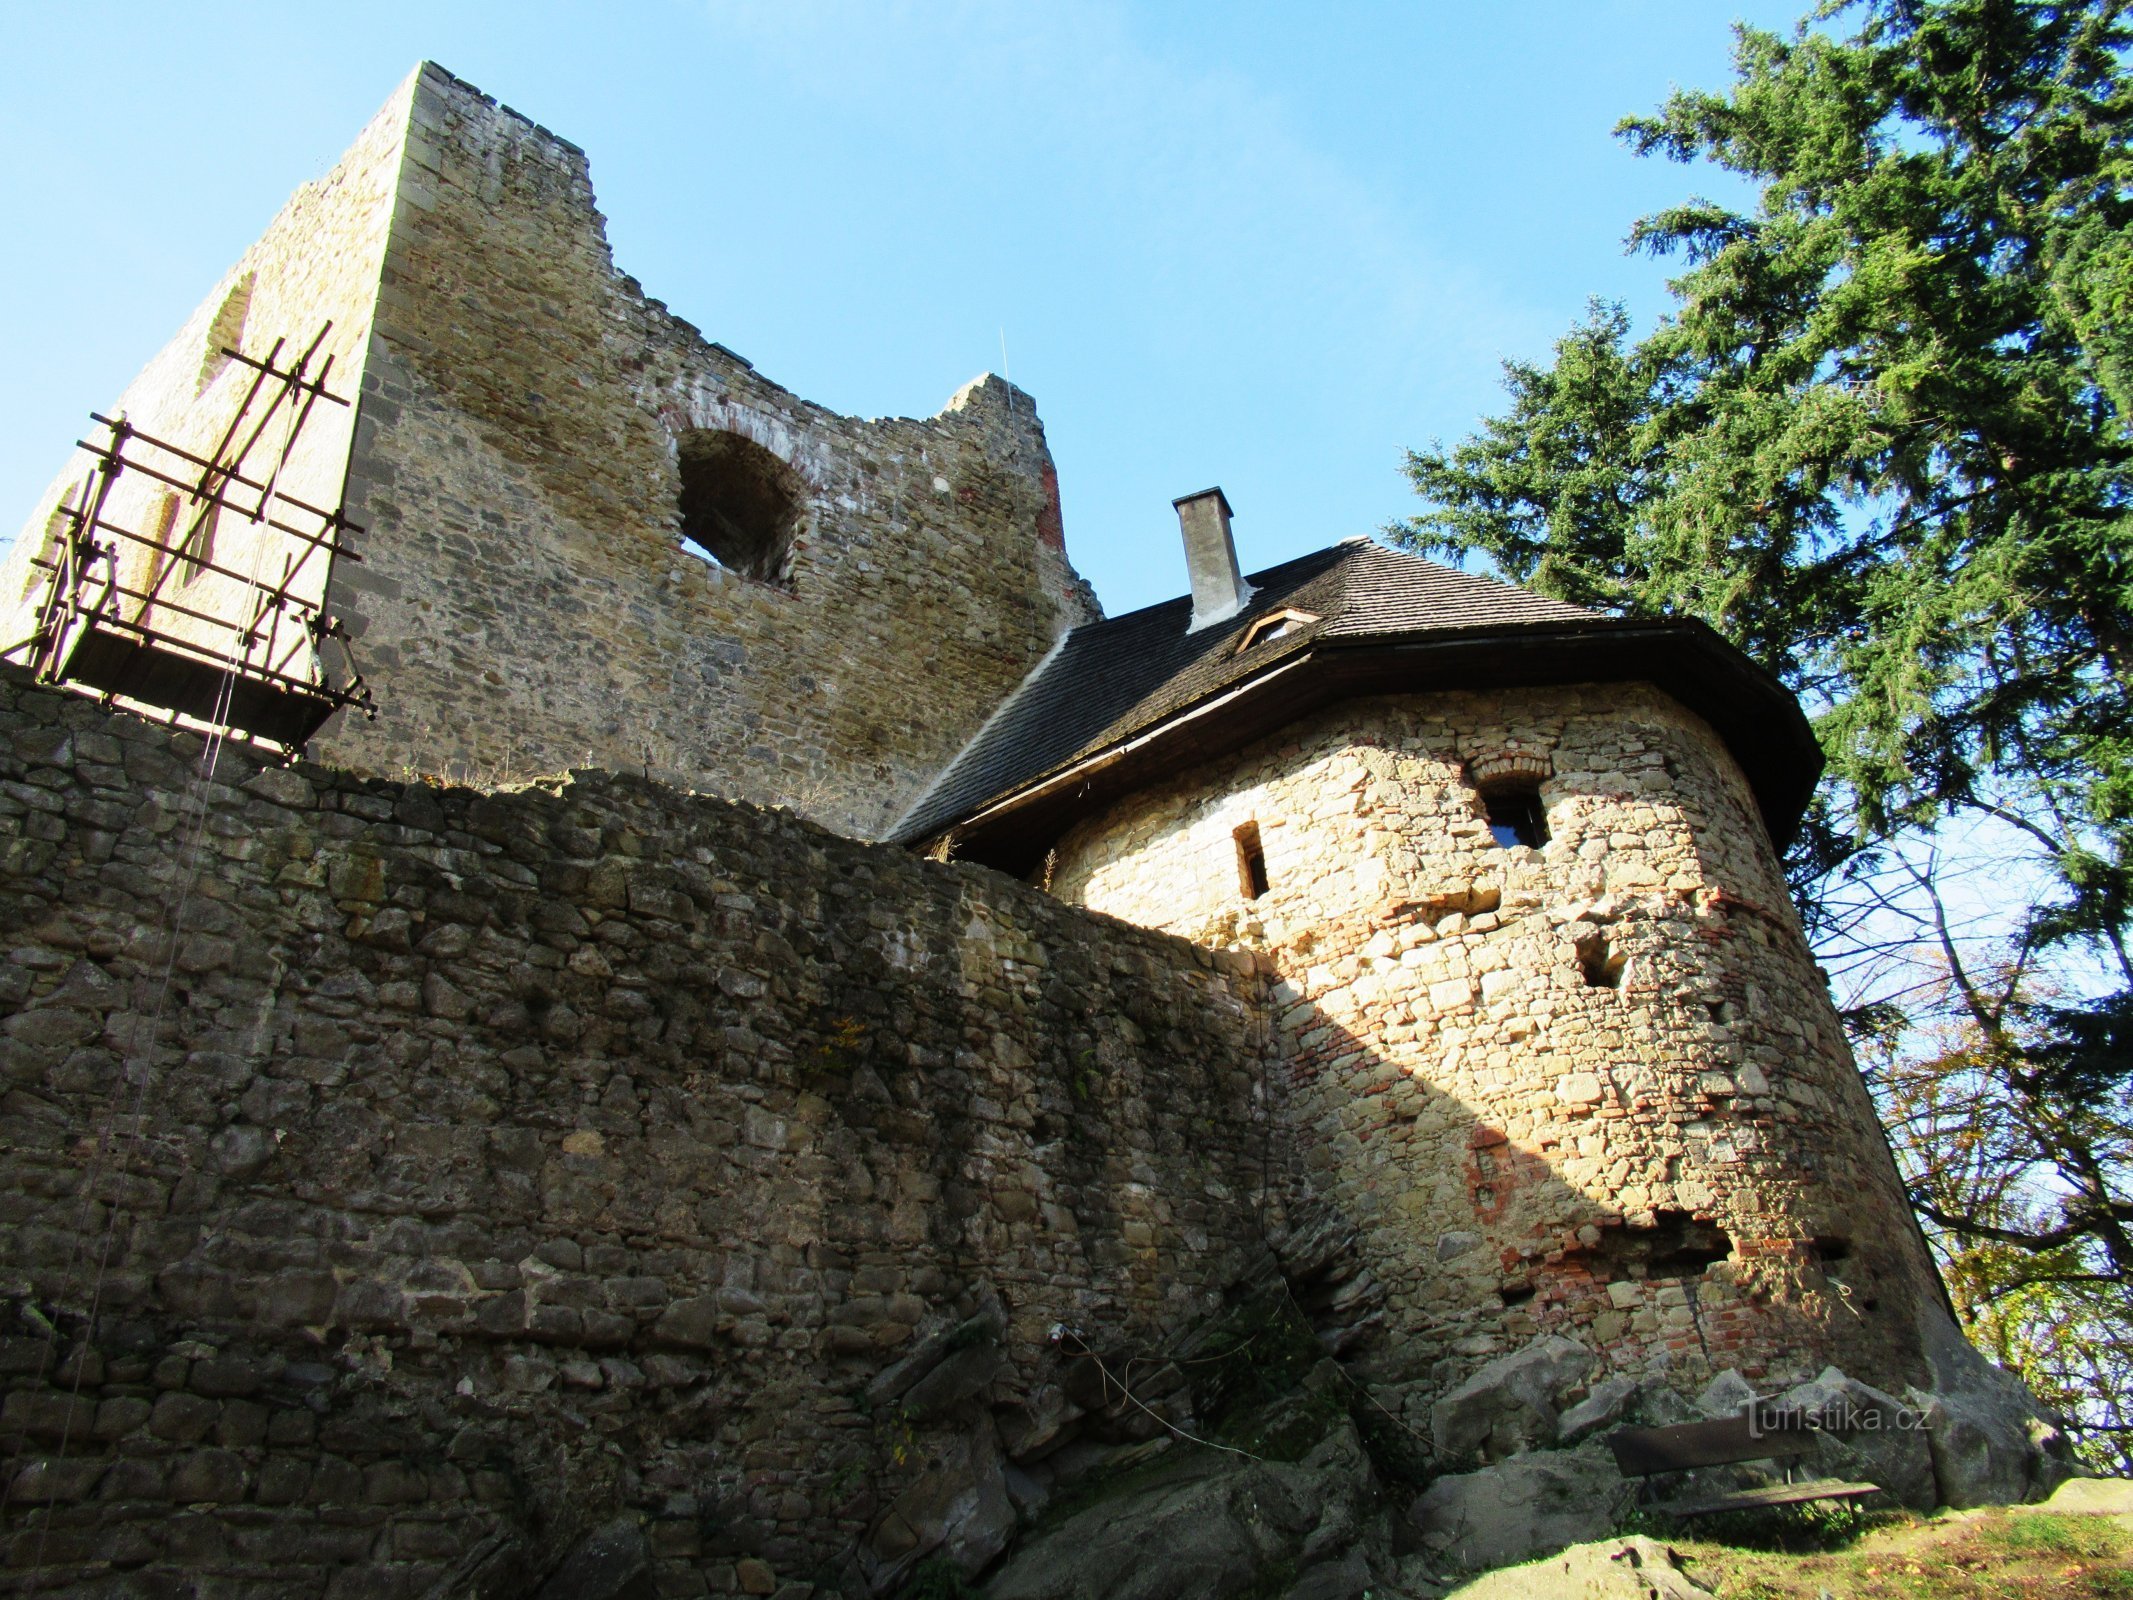 A surprise in the middle of the forest - in the footsteps of French Gothic to Cimburk Castle